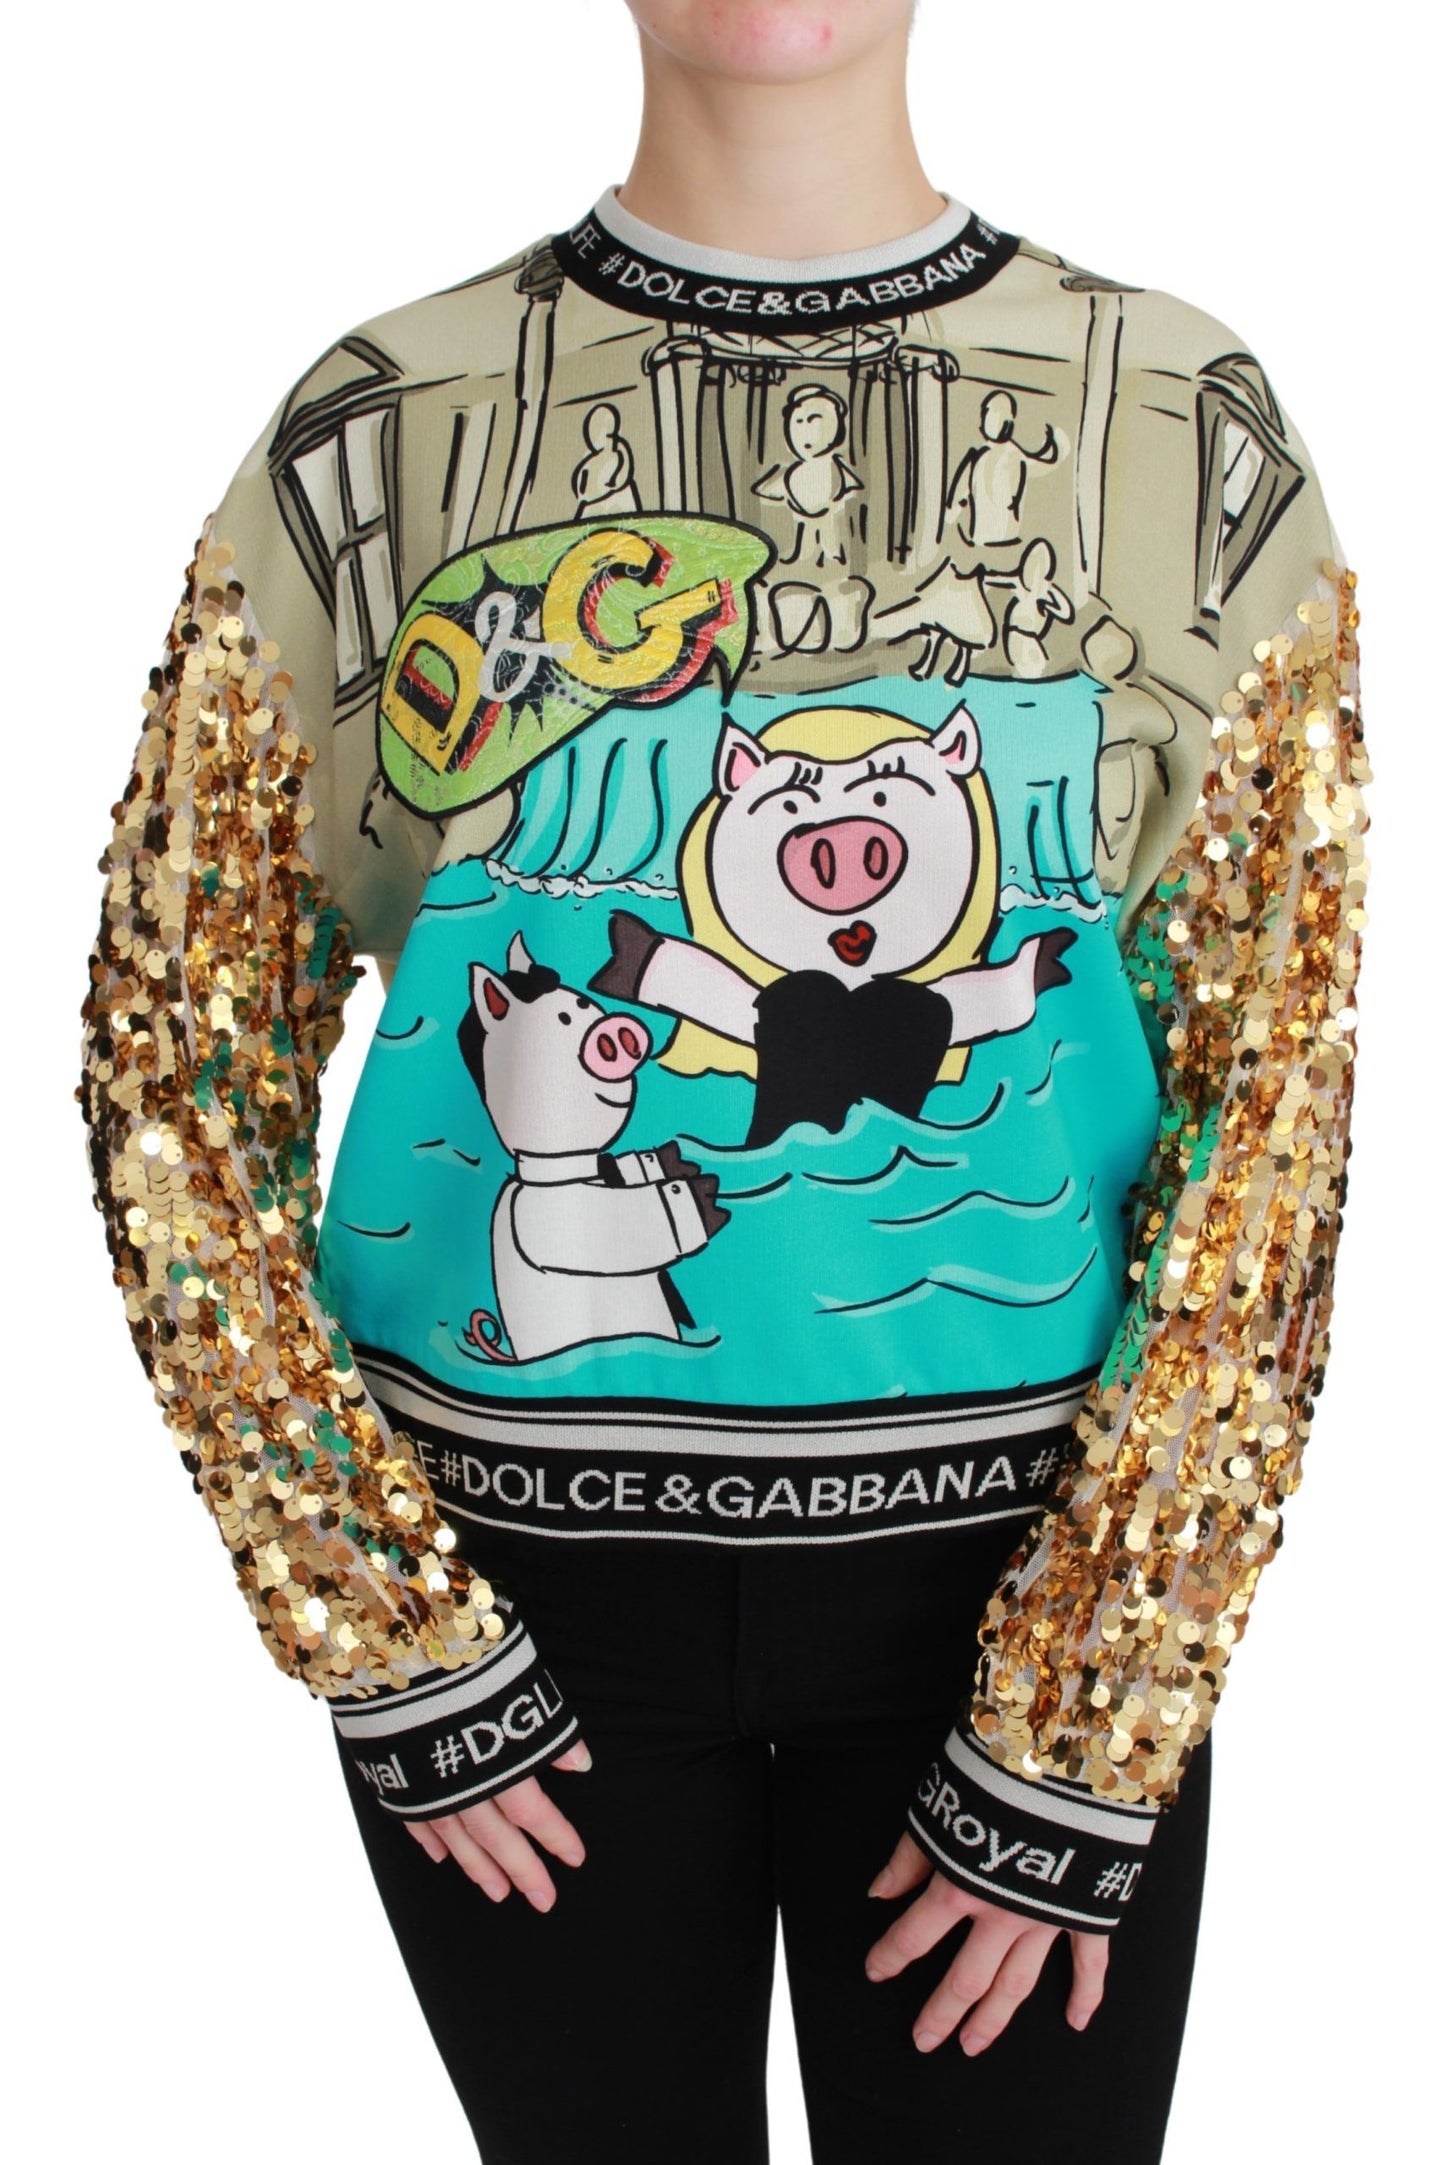 Dolce & Gabbana Year of the Pig Sequined Top  Sweater